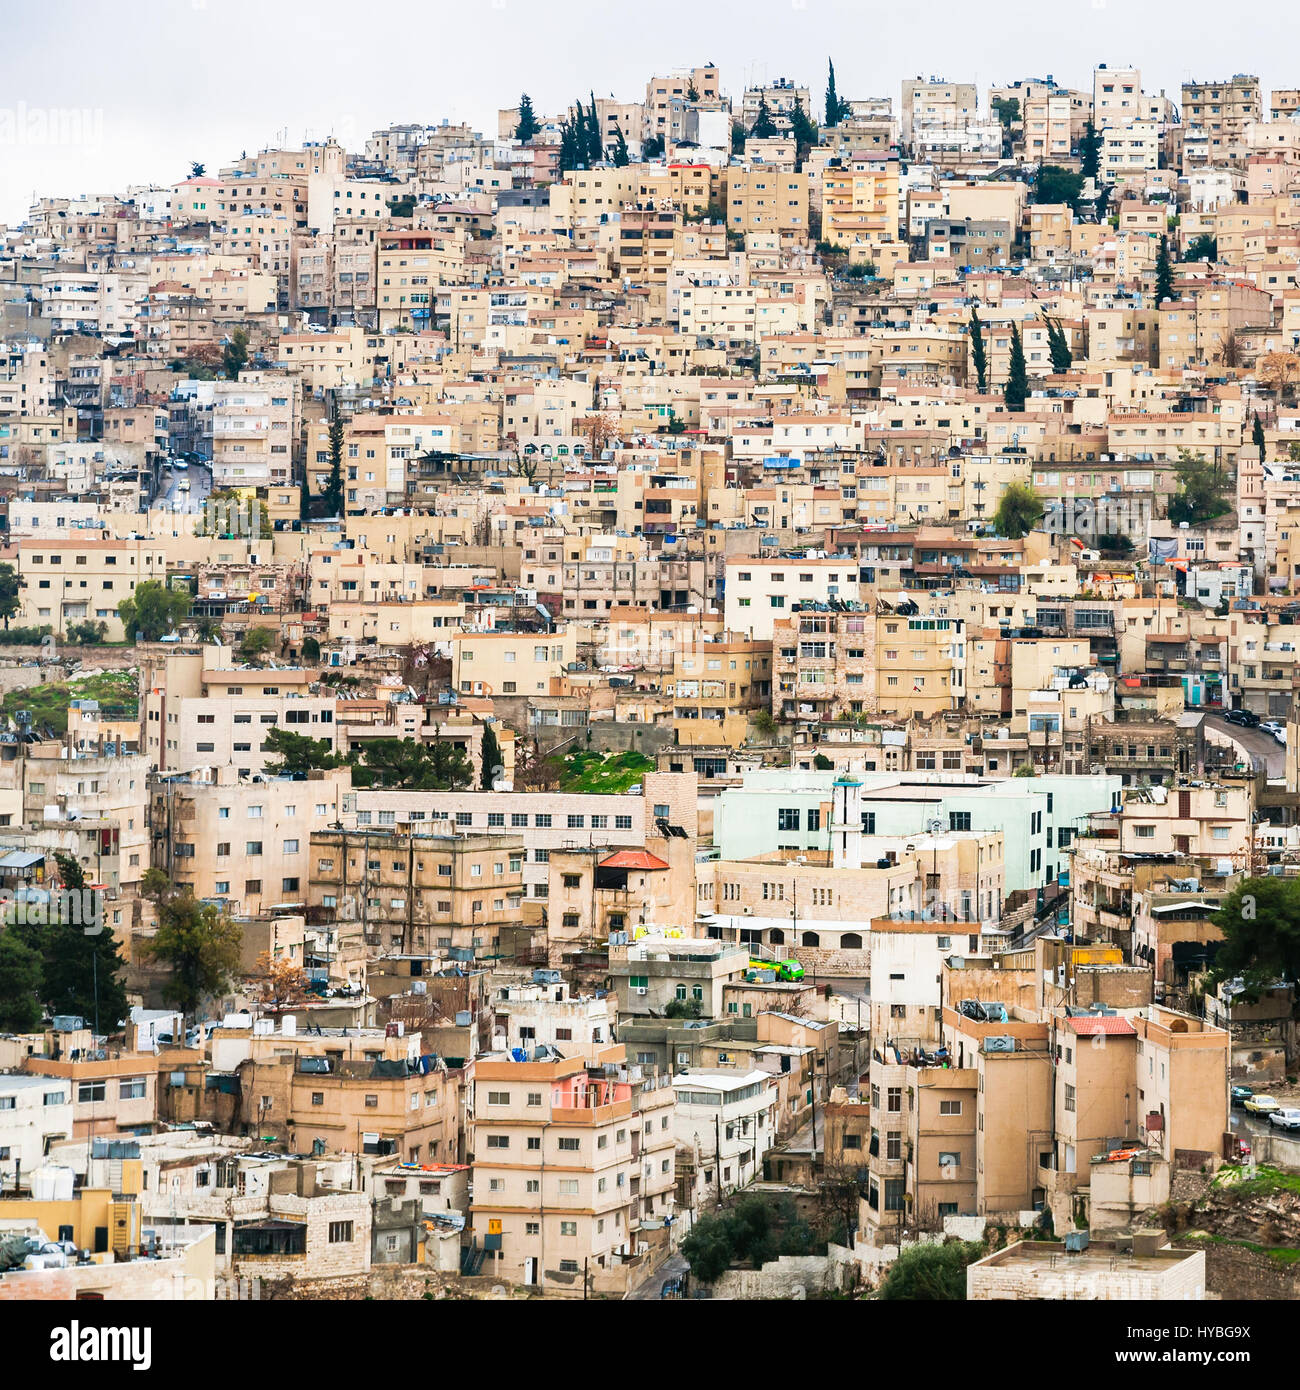 country of amman